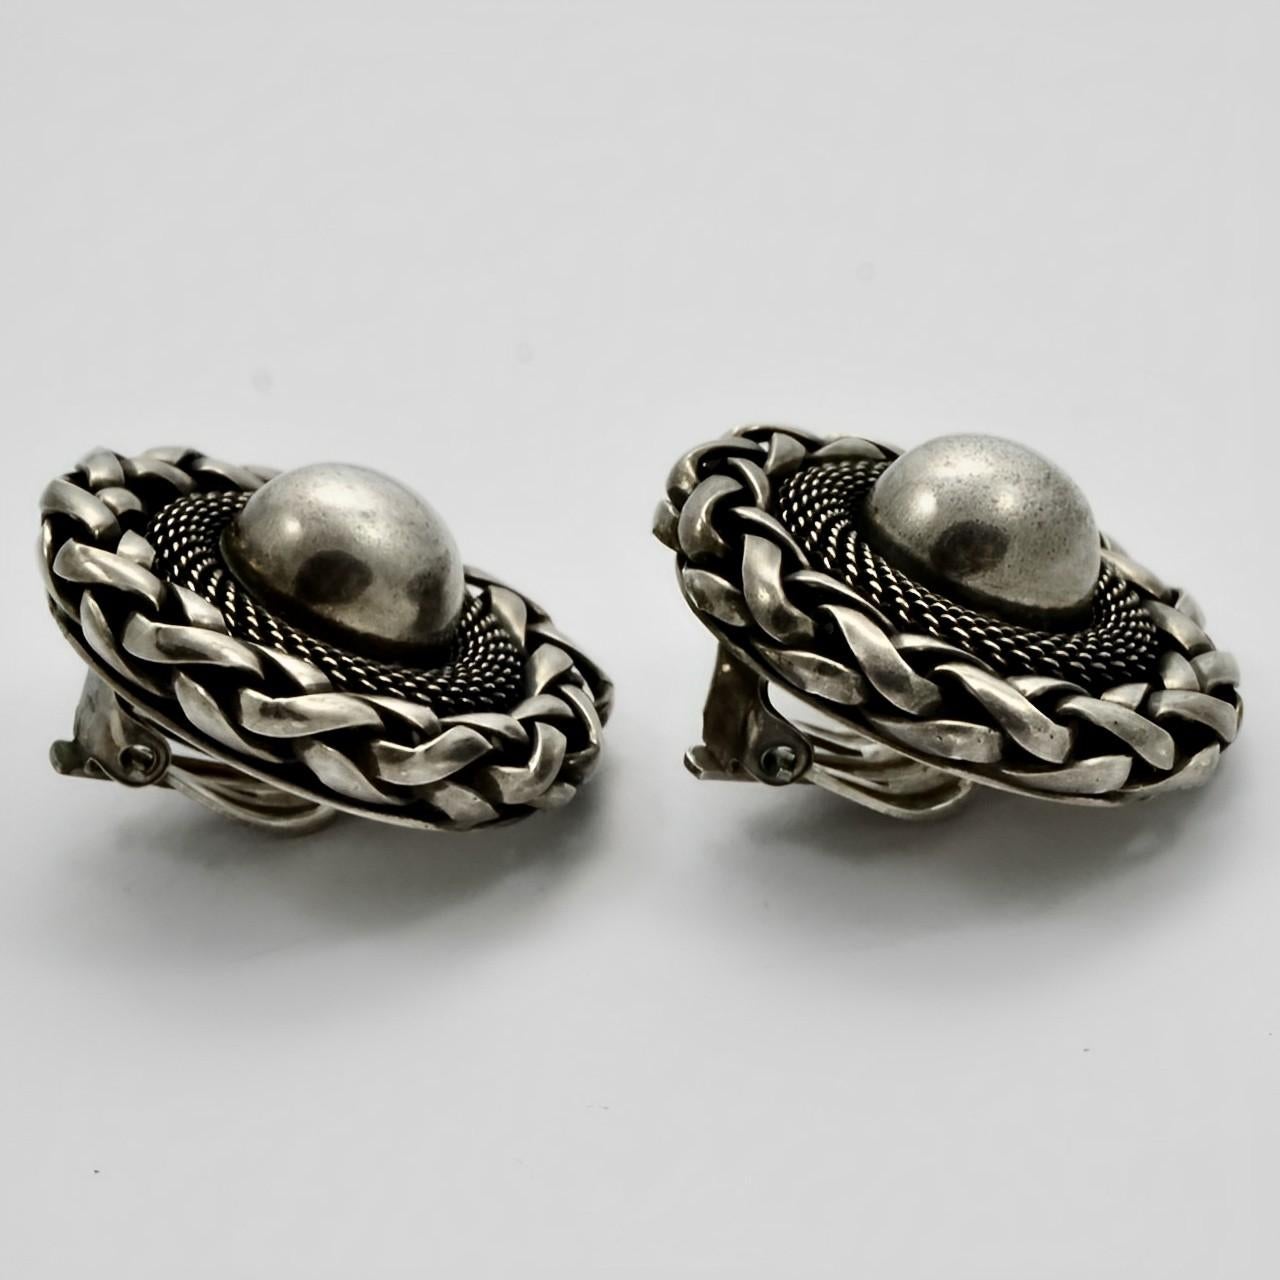 Butler & Wilson Silver Tone Ornate Clip On Earrings circa 1980s For Sale 2